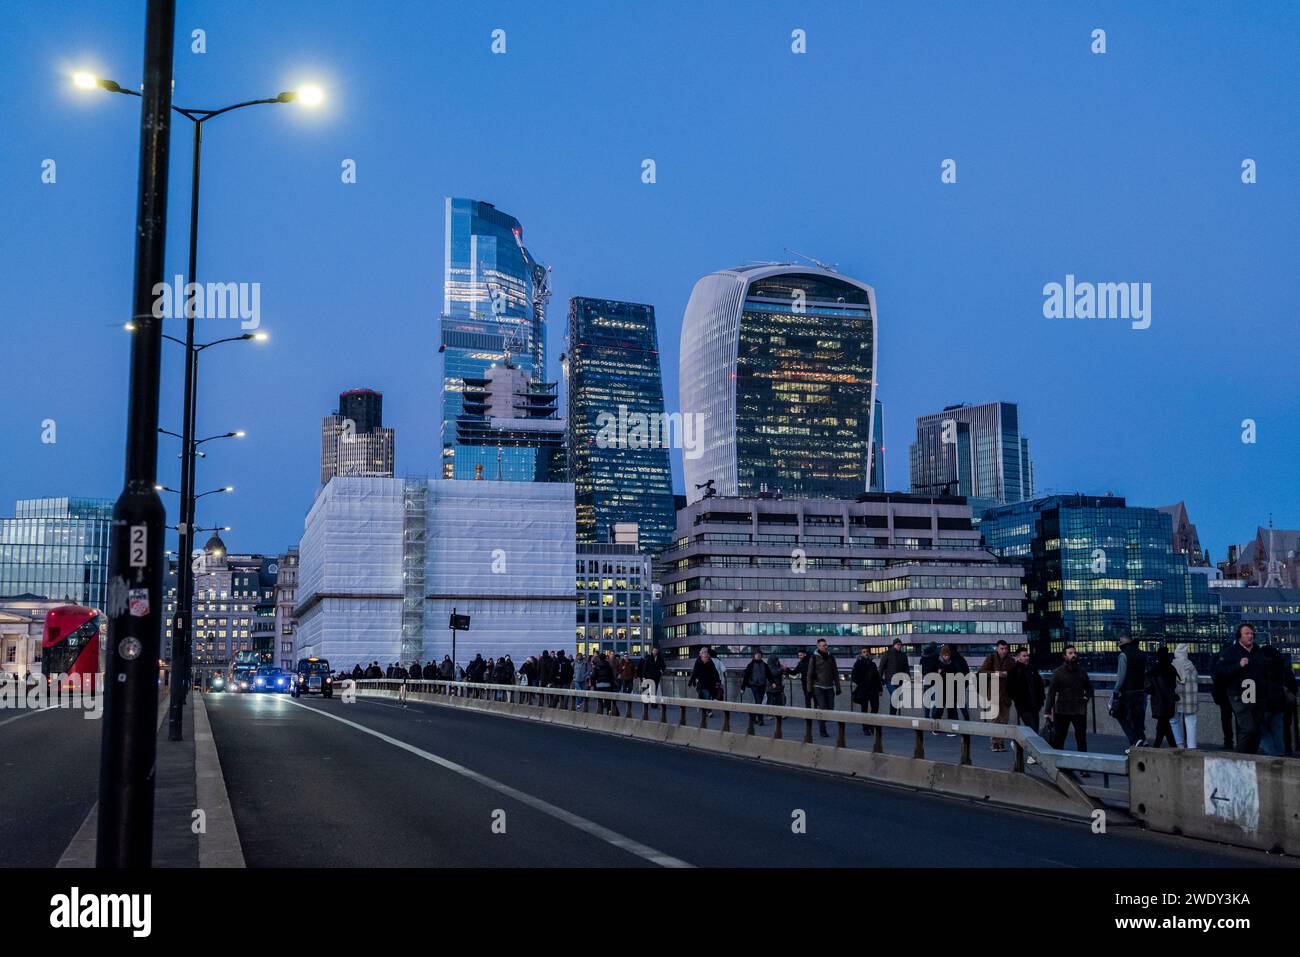 People walking over London Bridge and Cityscape of the City of London with the Walkie-Talkie and Cheesegrater towers,  London, England, UK Stock Photo